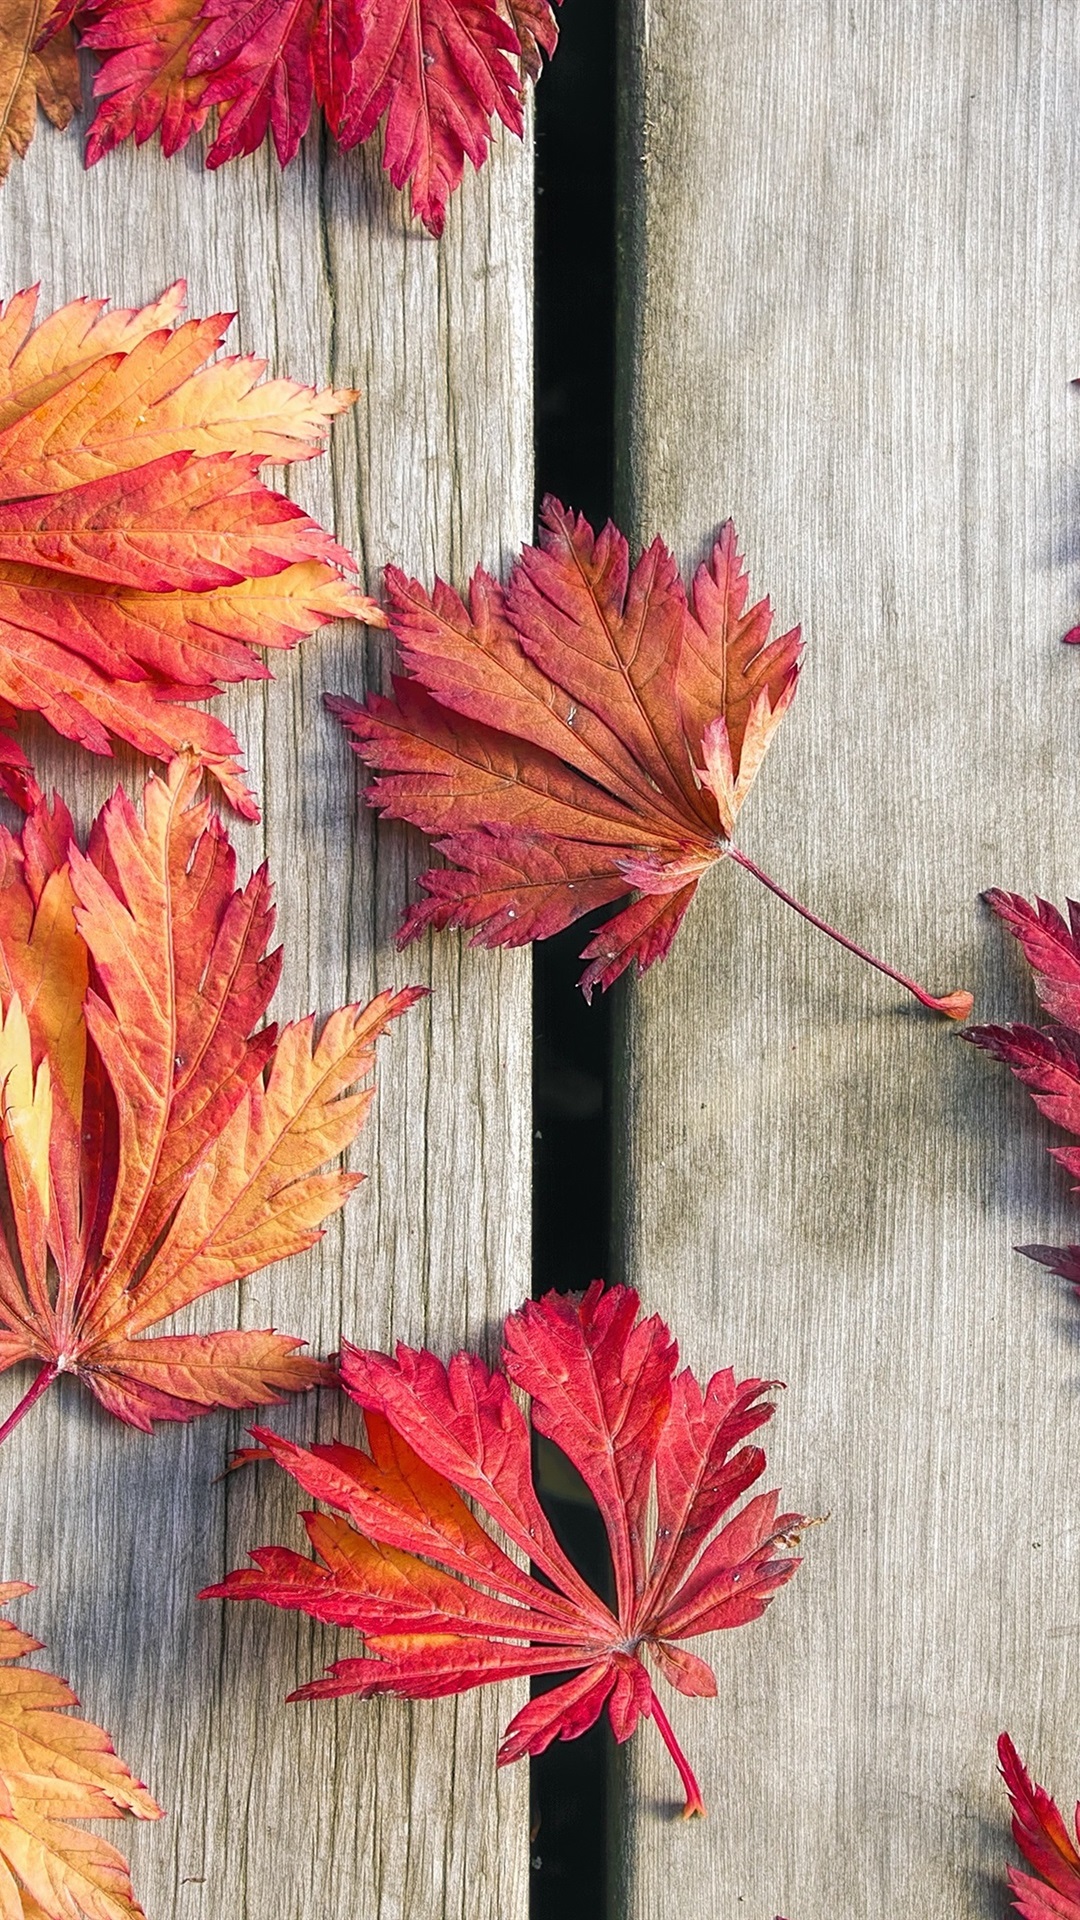 Japanese Maple Tree Leaves On Wood Deck , HD Wallpaper & Backgrounds